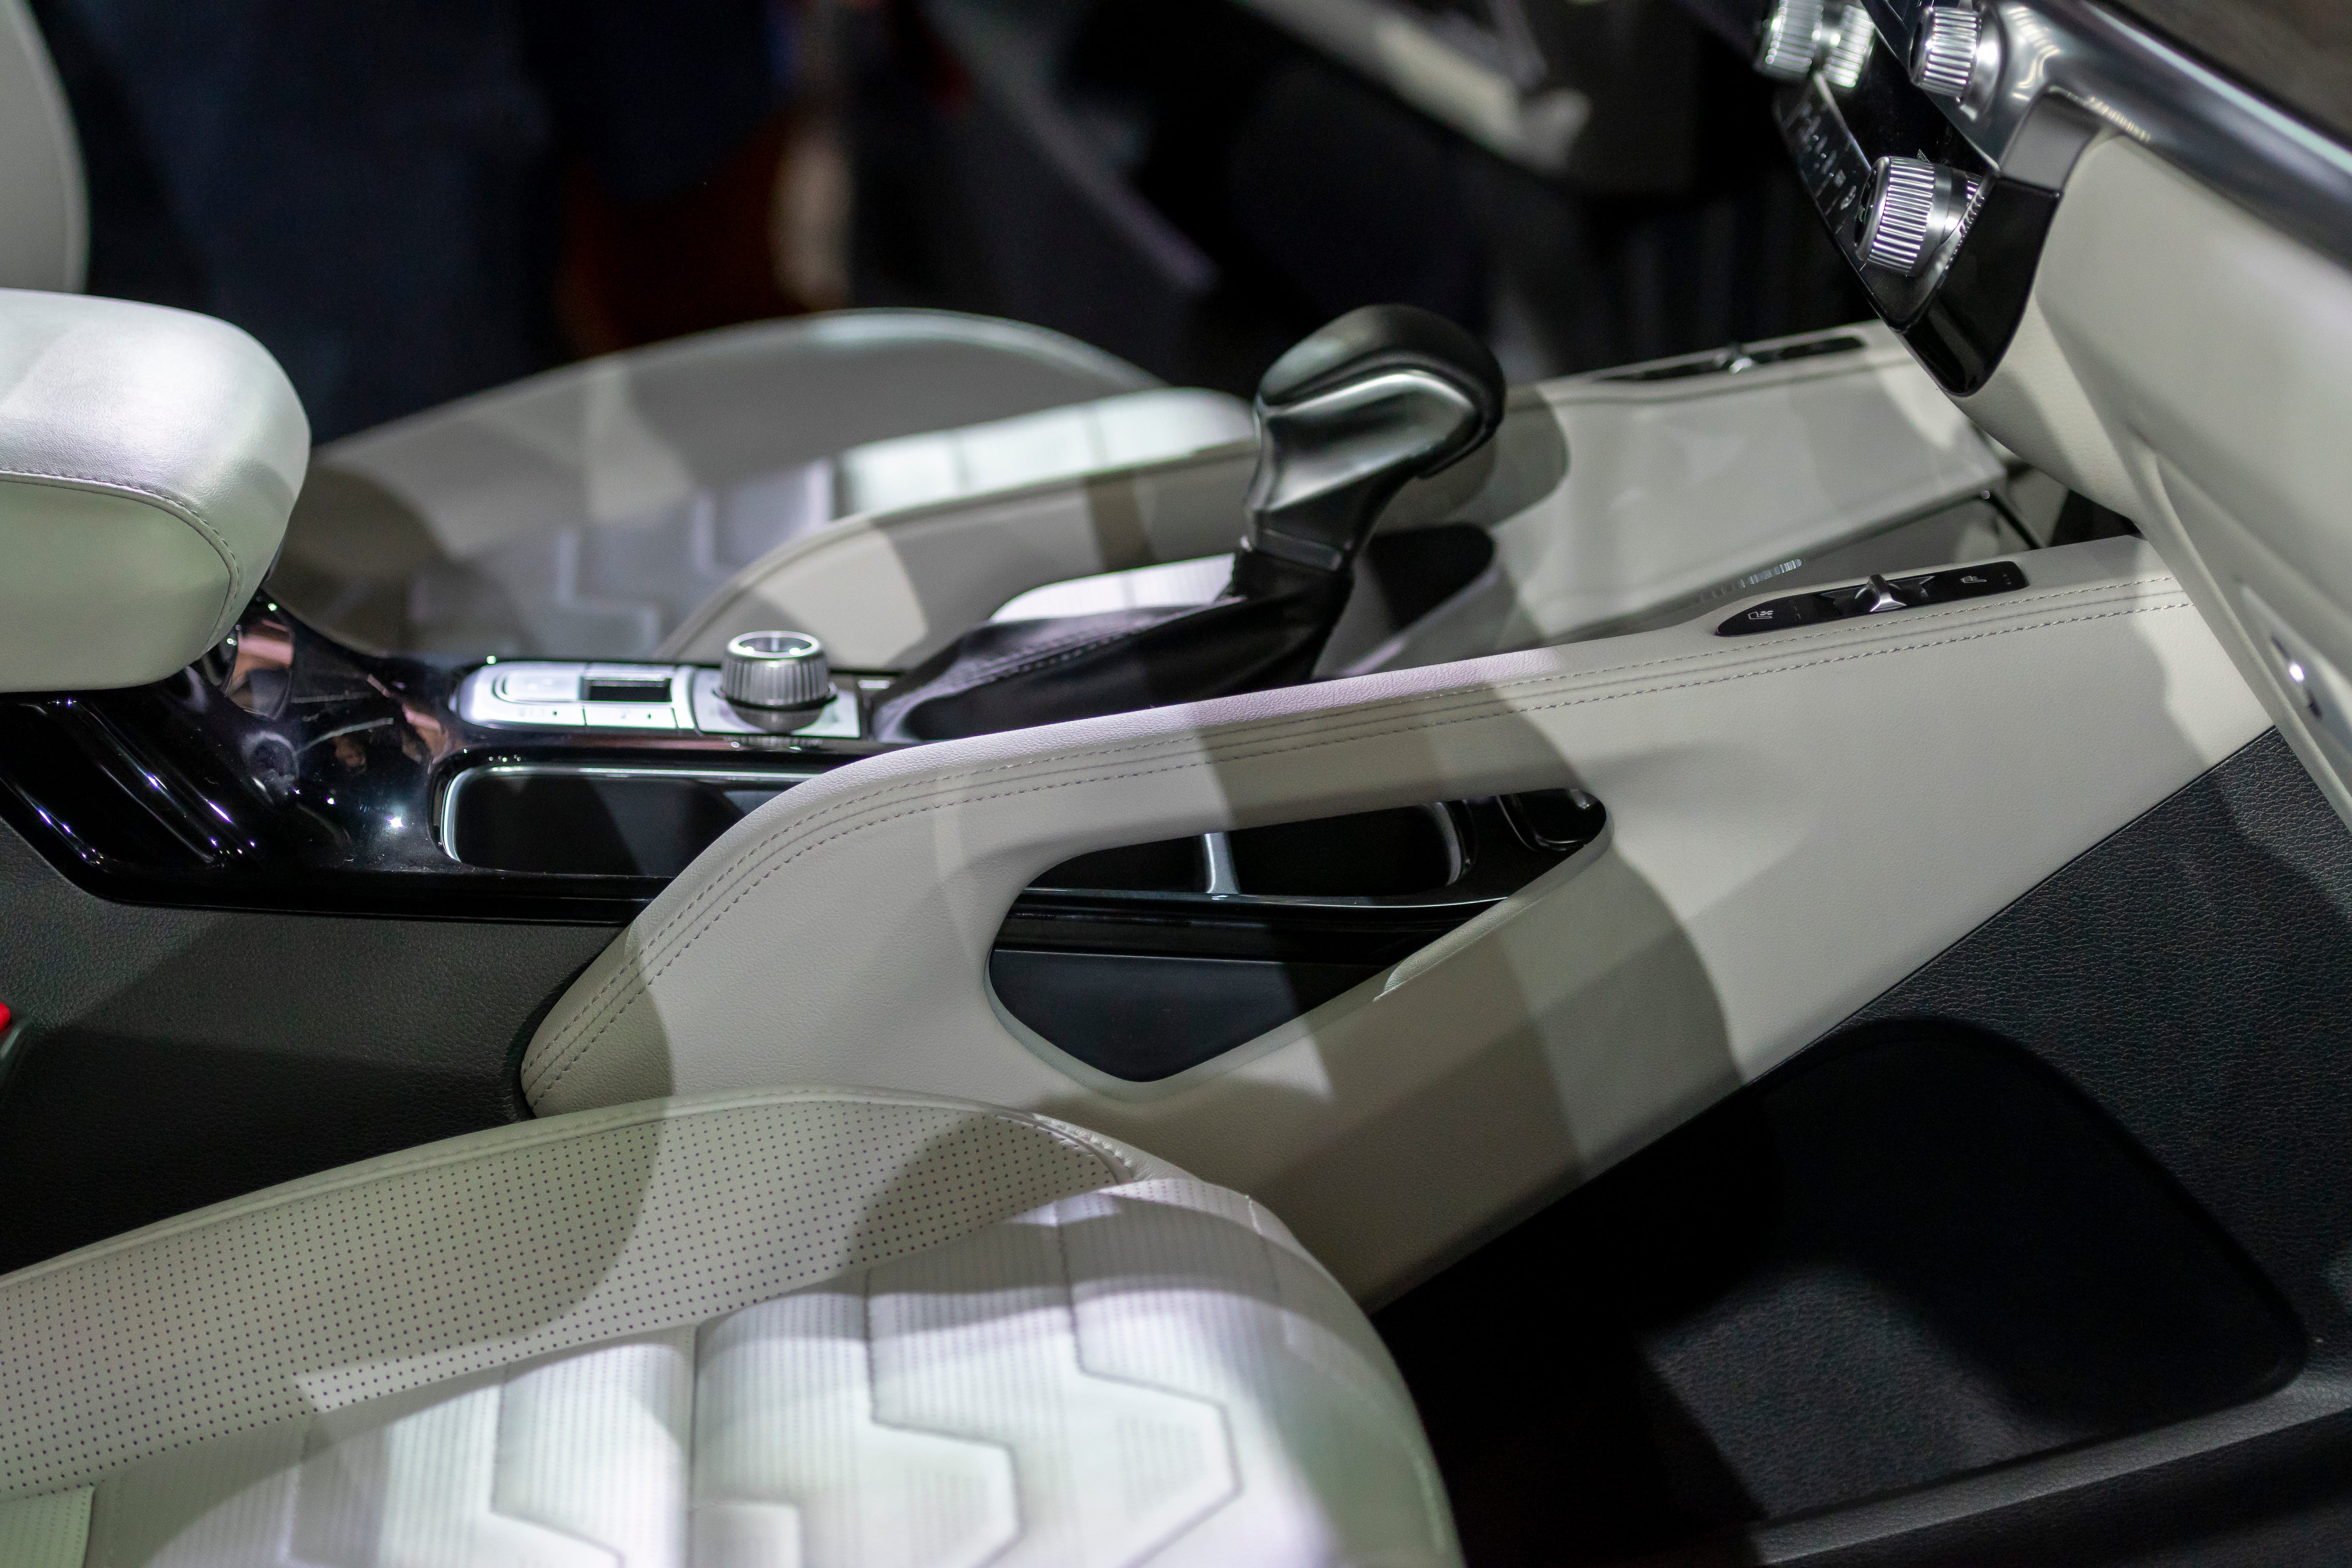 Large handle grips are part of the interior of the 2020 Kia Telluride.